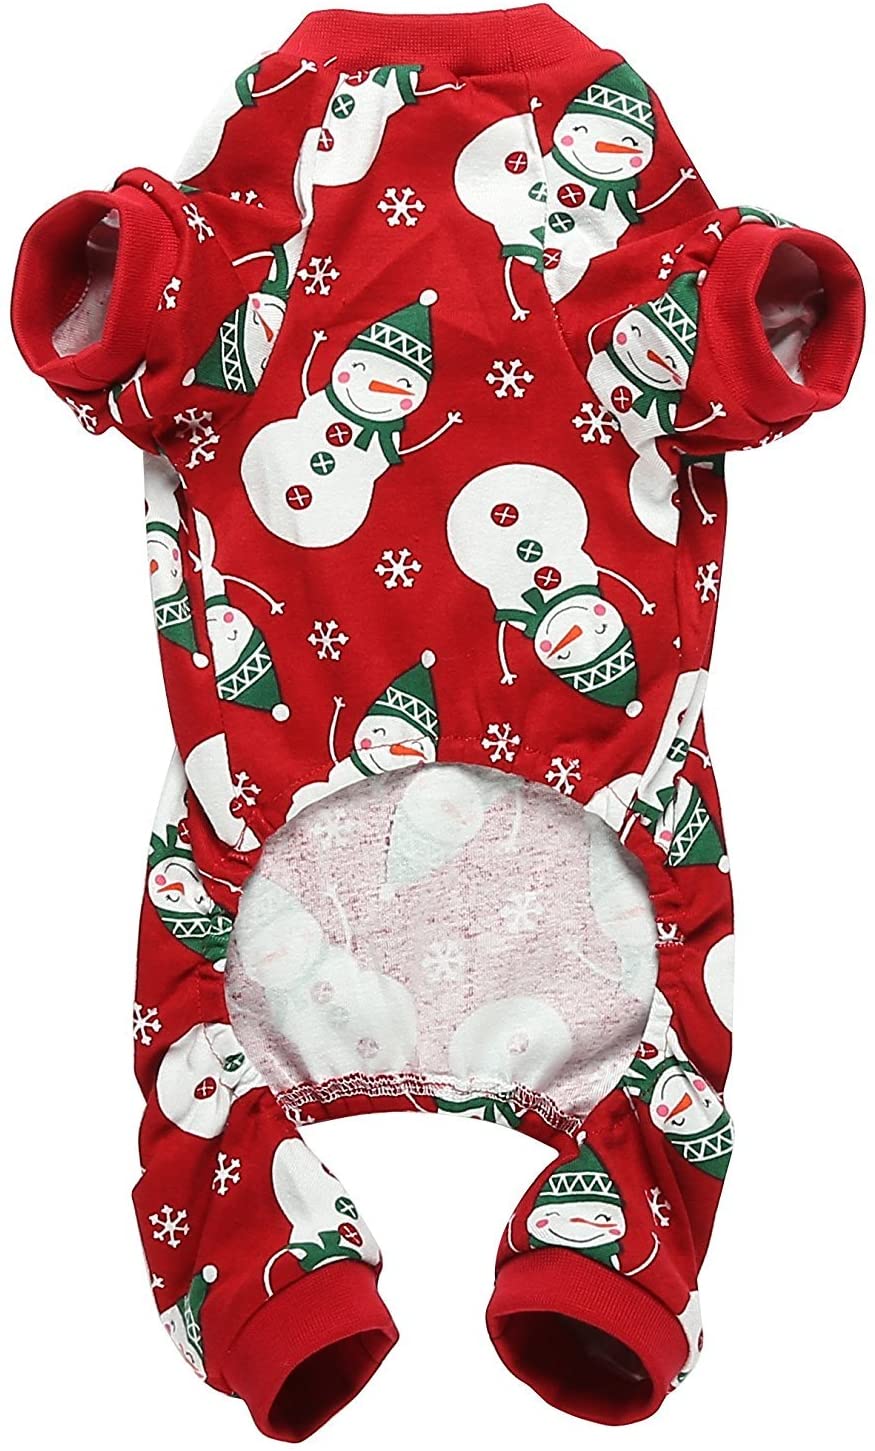 Lanyarco-Lovely-Small-Pet-Dogs-Pajamas Cutest 10 Pajamas for Dogs on Amazon in 2022